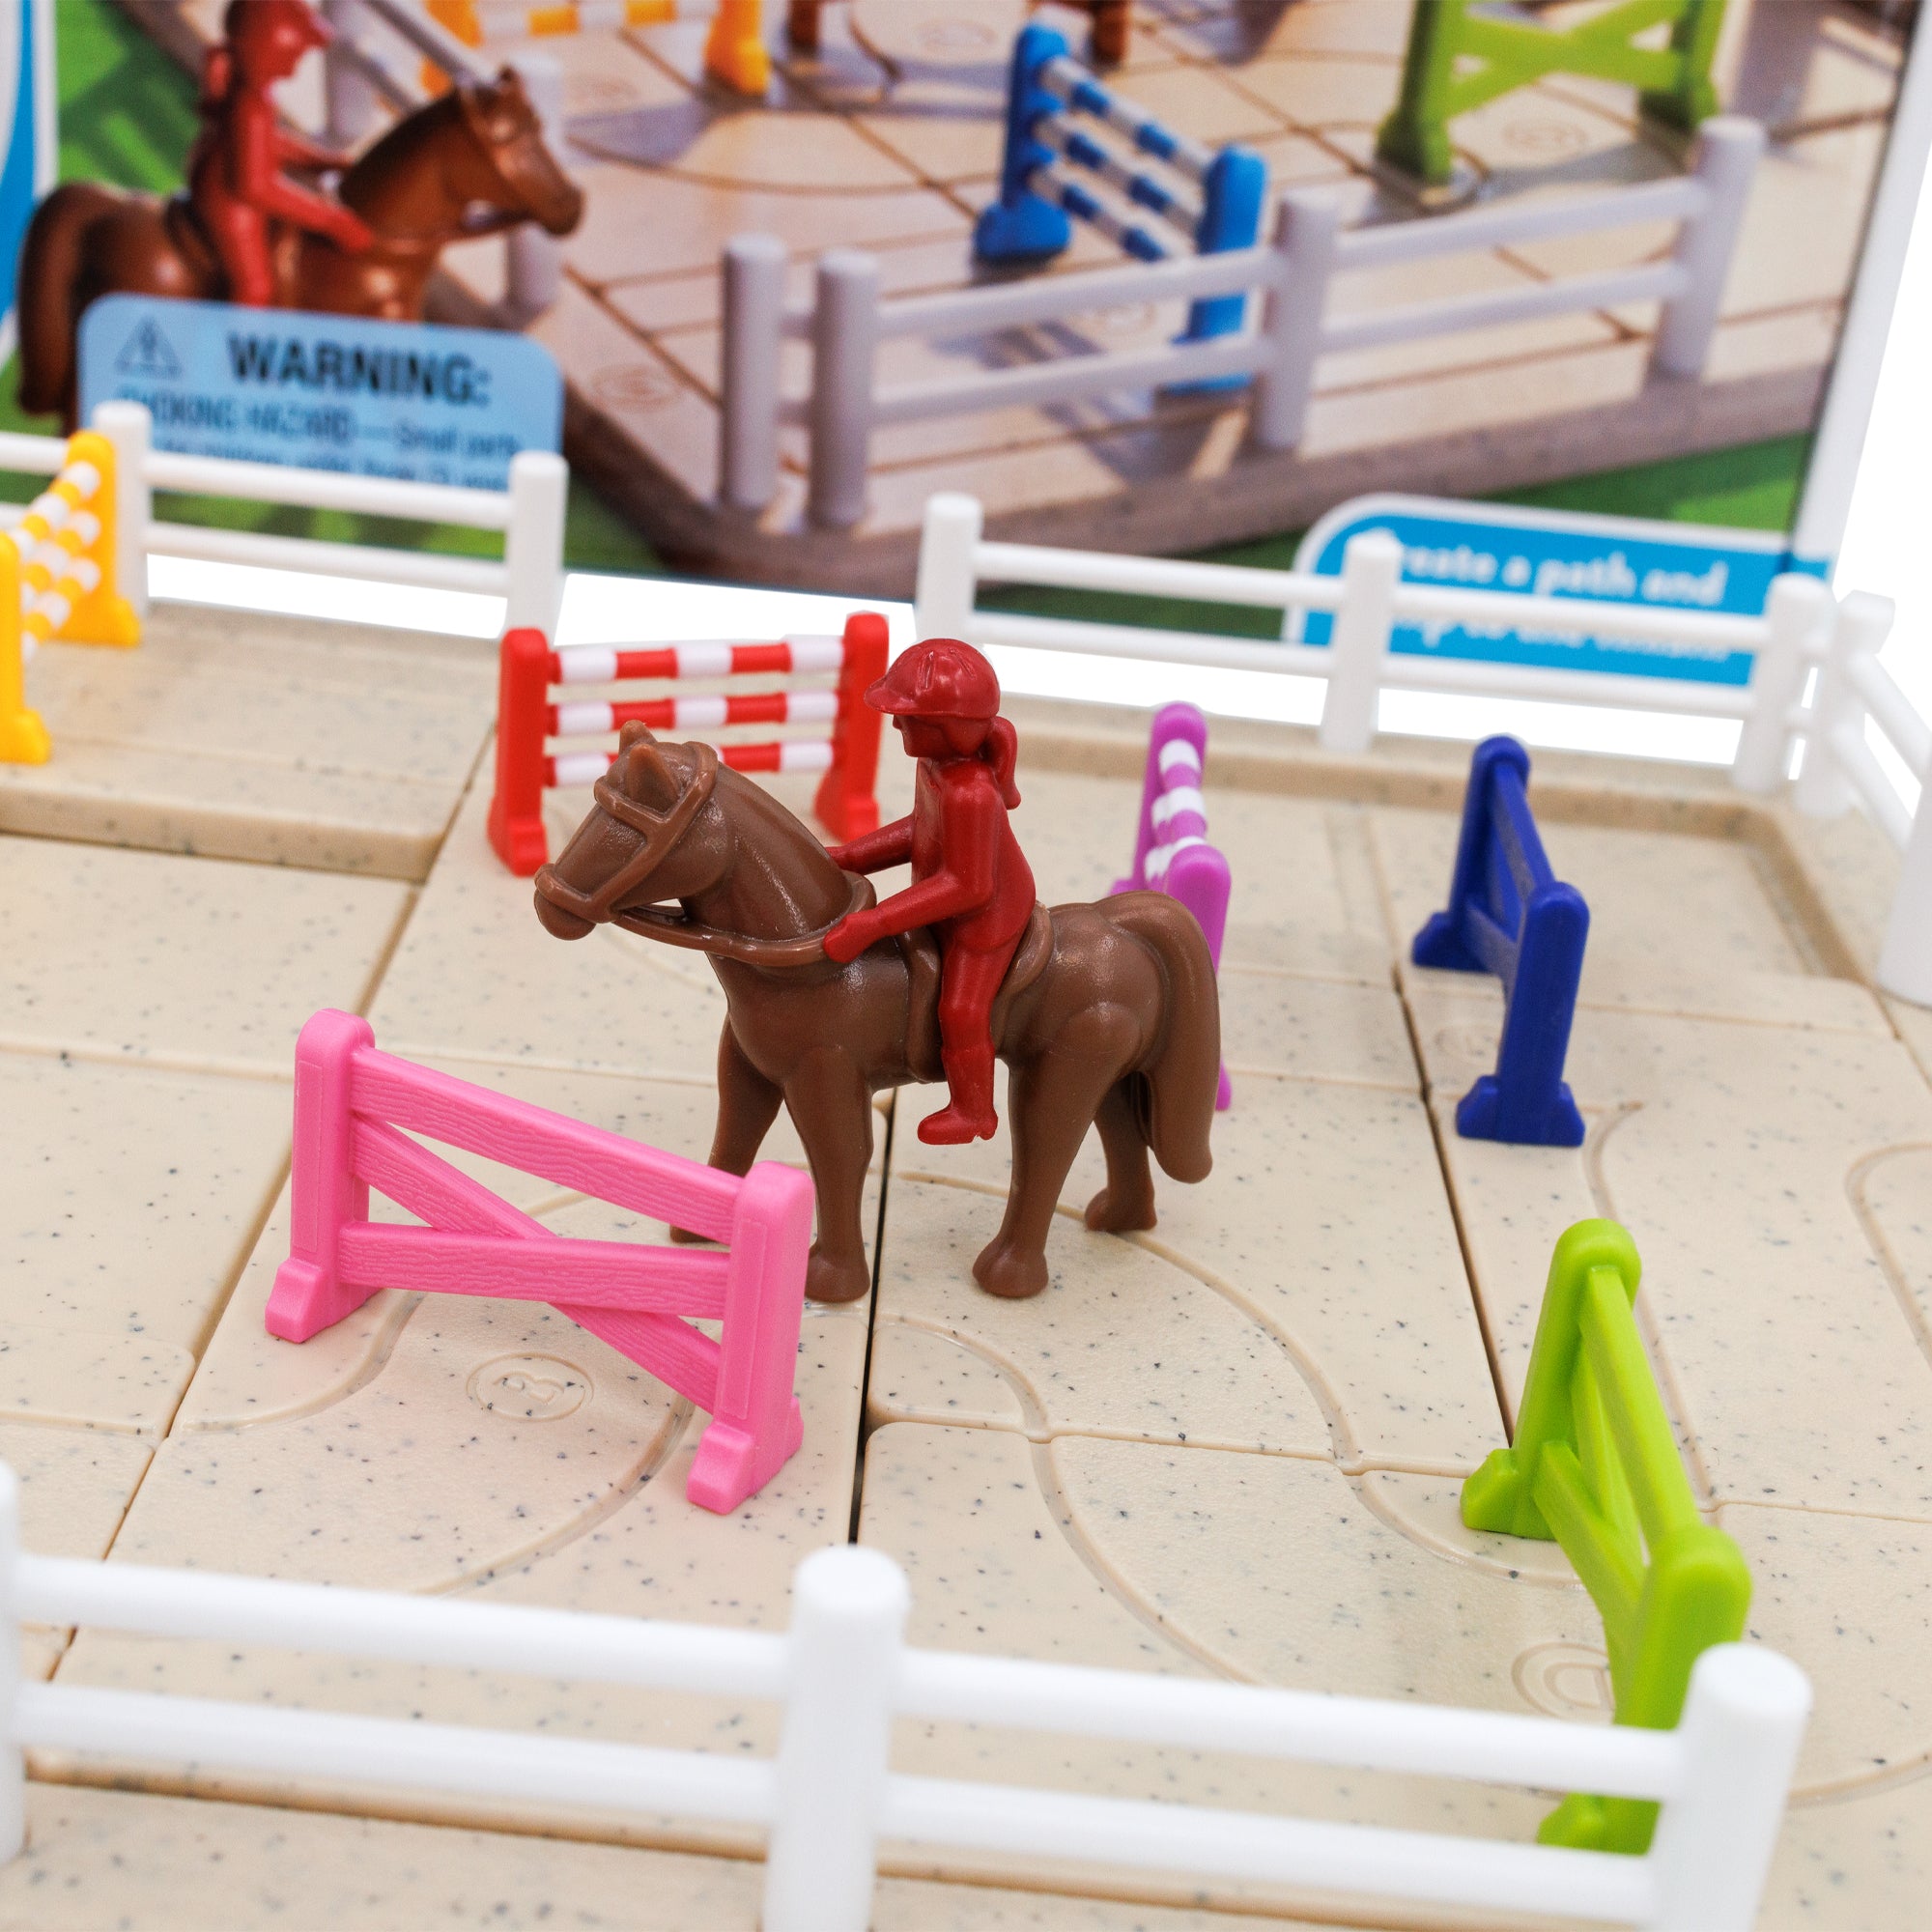 A close up of the Horse Academy game. The game board is a sand-colored rectangle with white fence pieces around the edges. There a several jumping fence pieces in many colors on the game board and a red girl character on top of a horse piece in between the fences. You can see the game box in the background, out of focus.